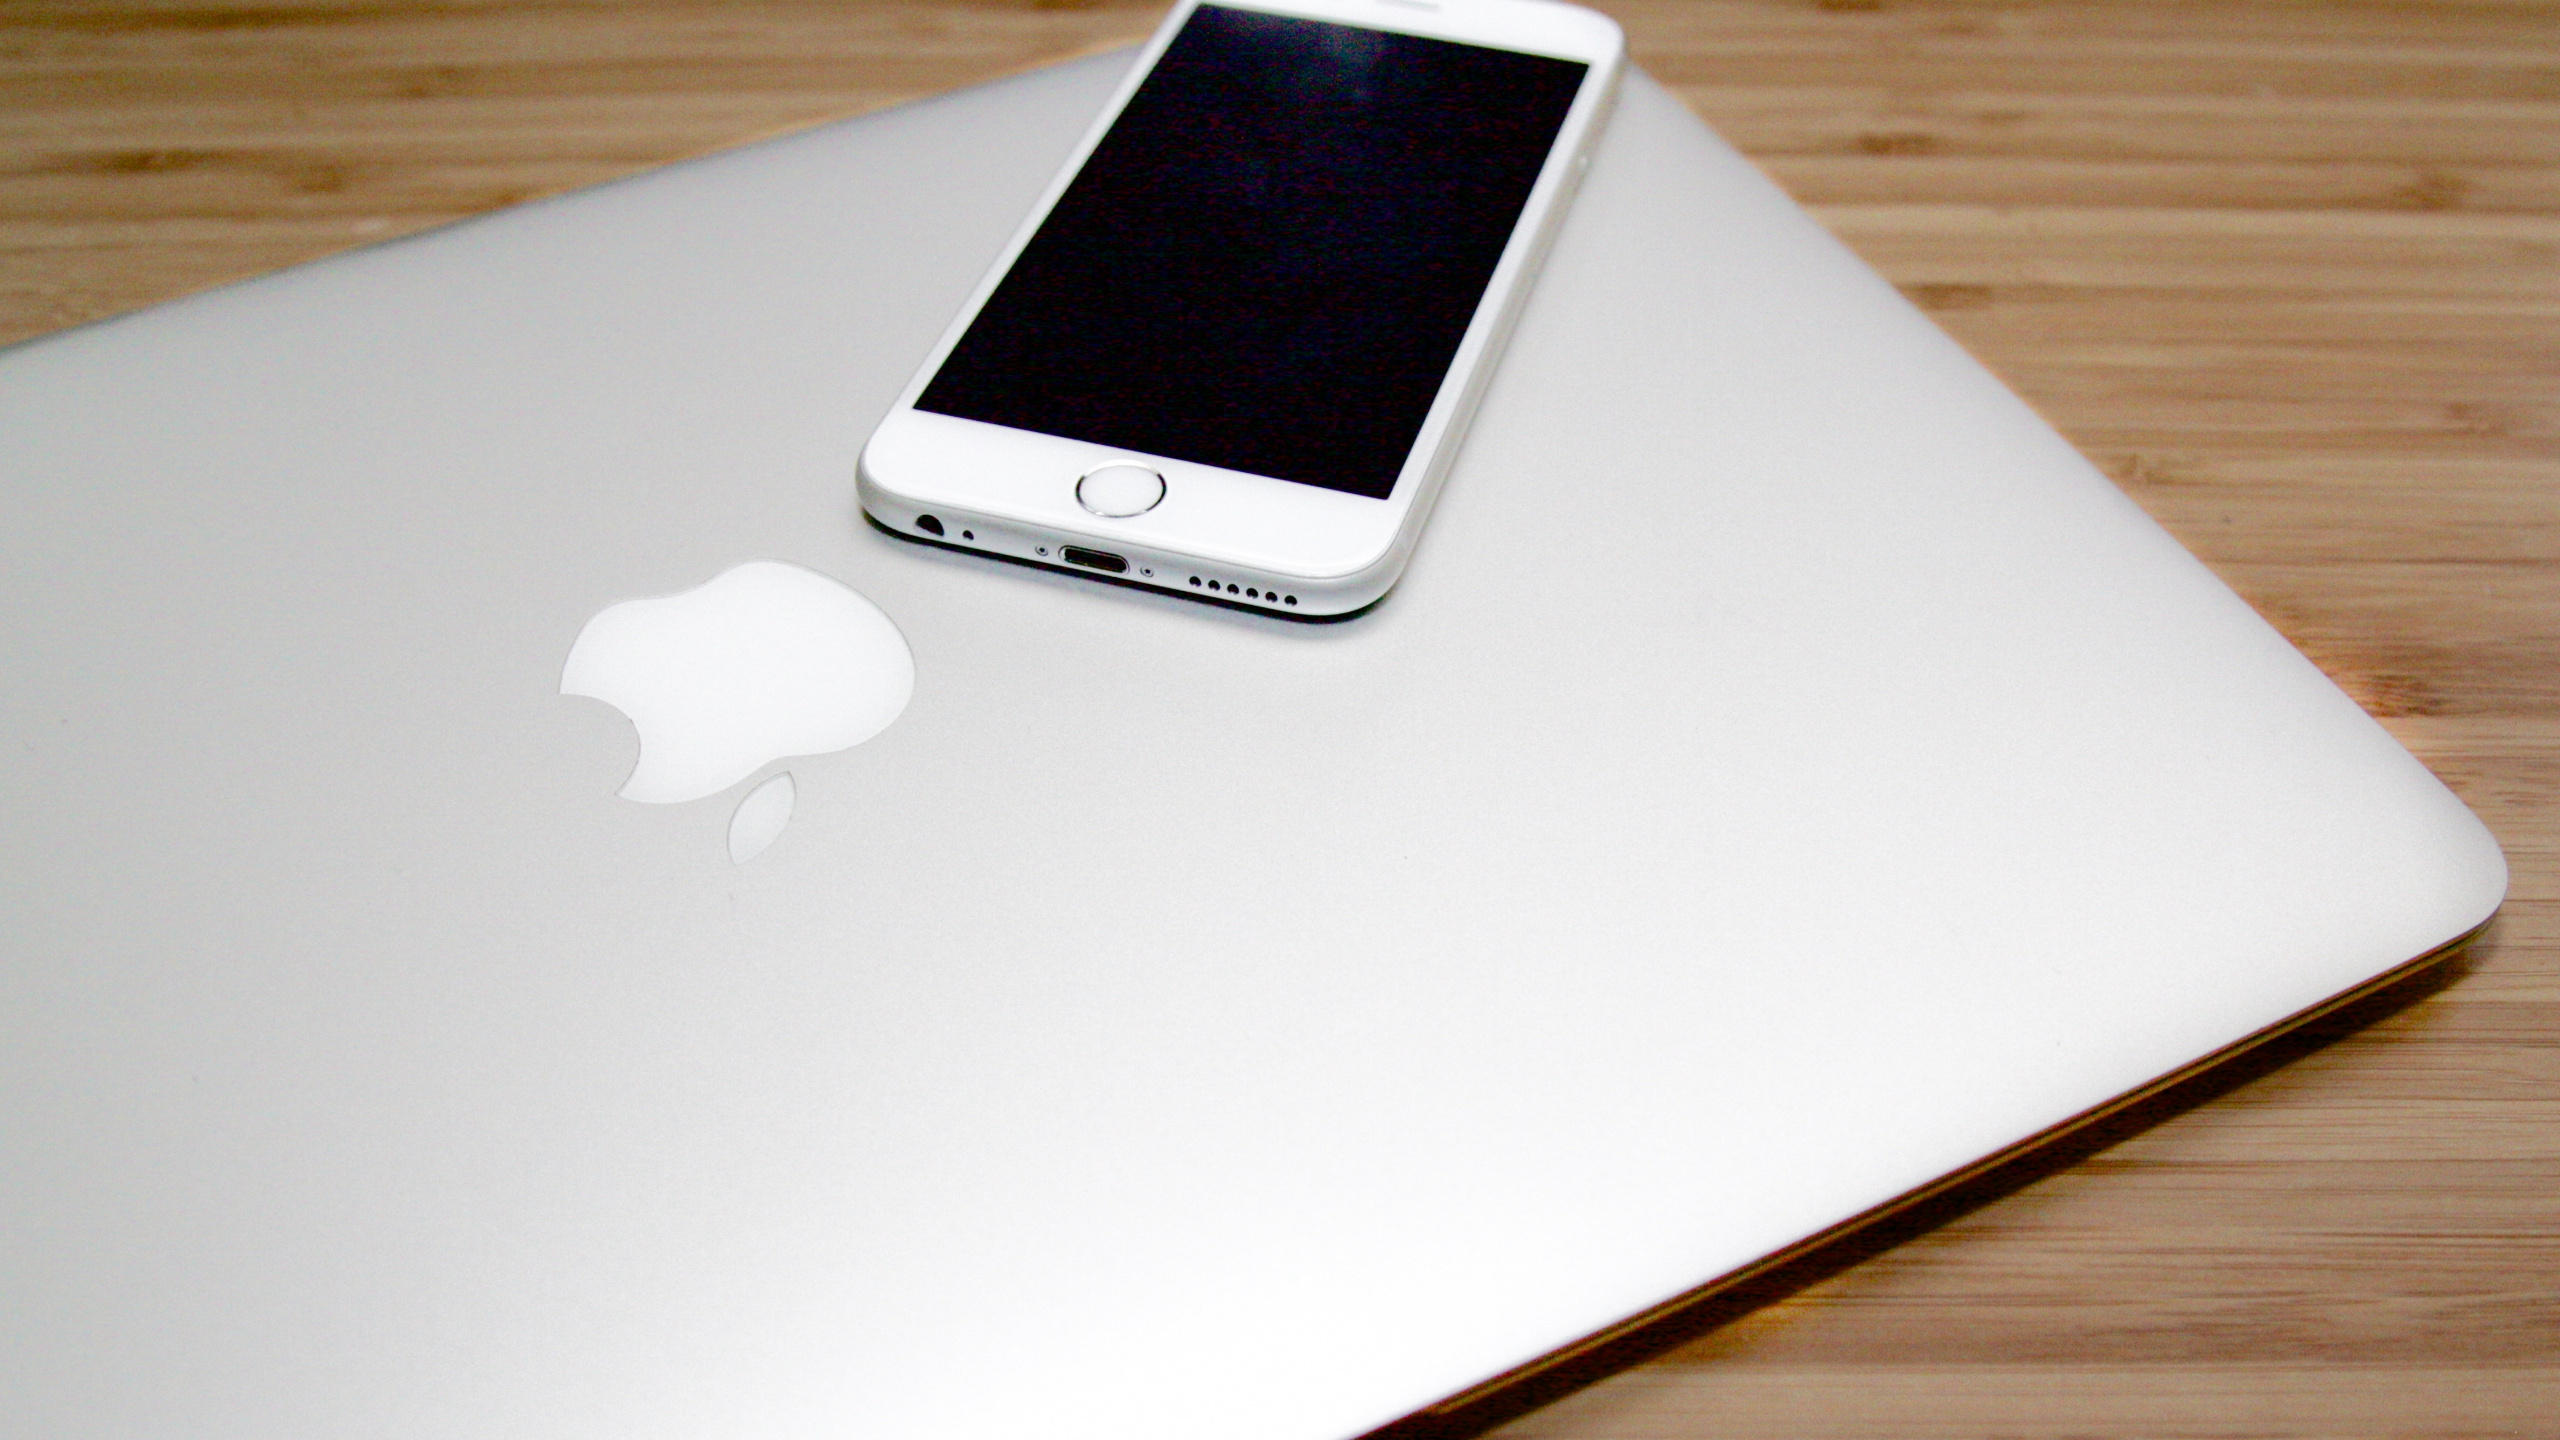 Silver Iphone 6 on Macbook. Wallpaper in 2560x1440 Resolution